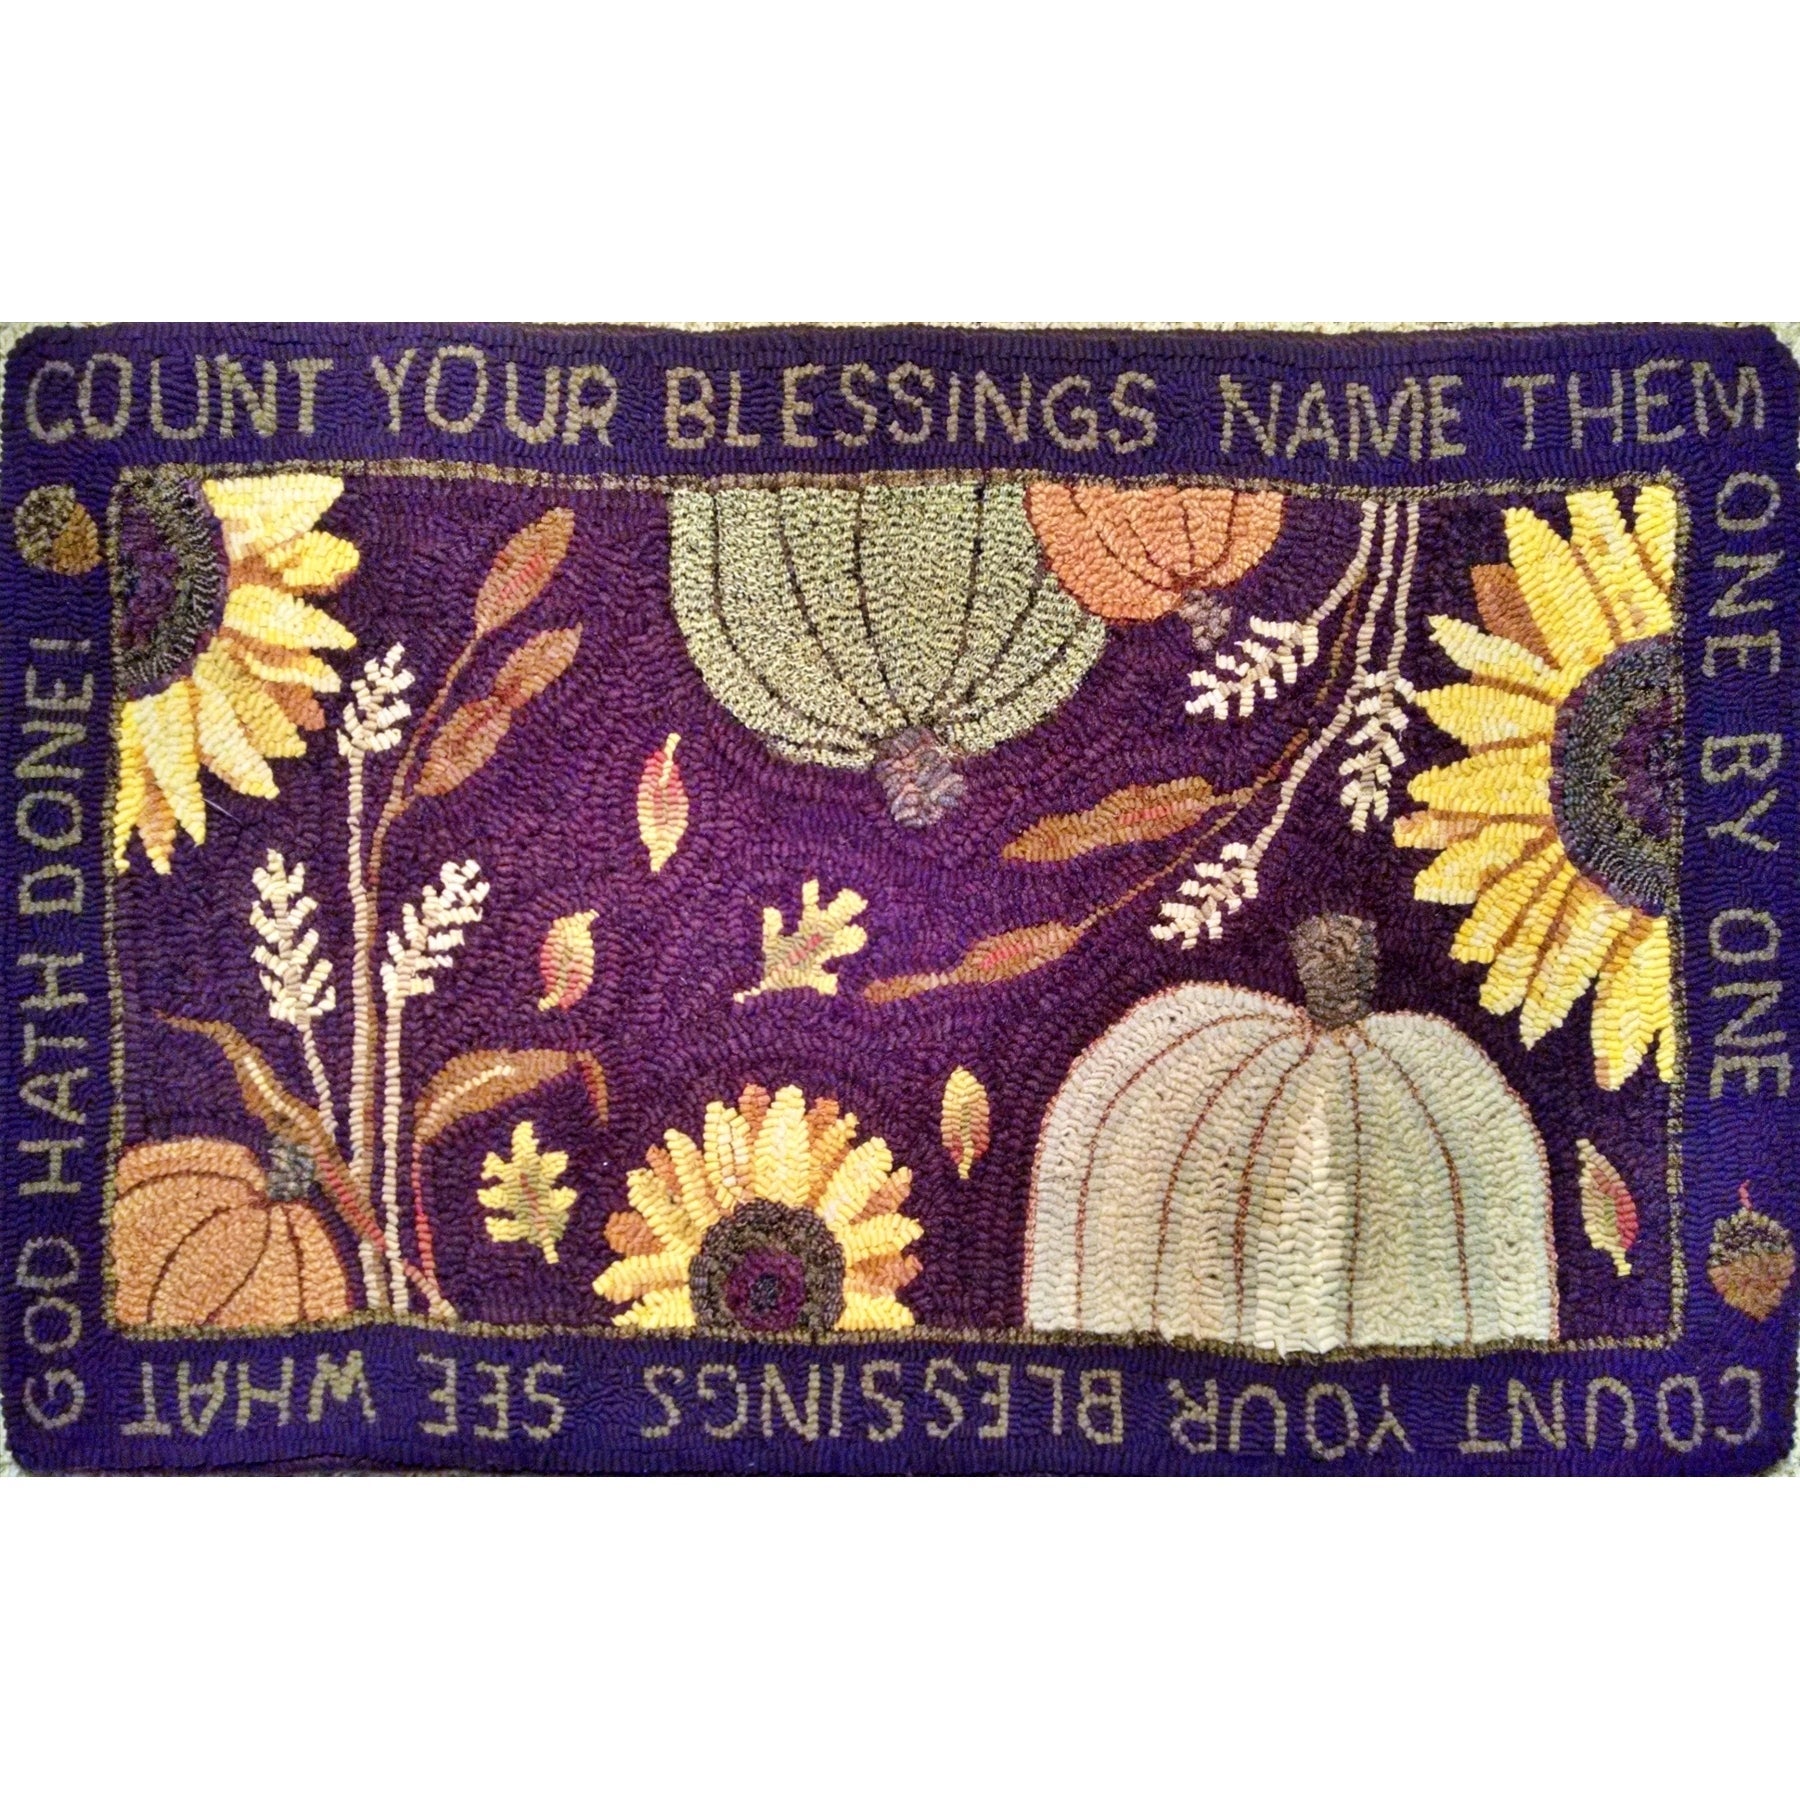 Thanksgiving, rug hooked by Connie Bradley